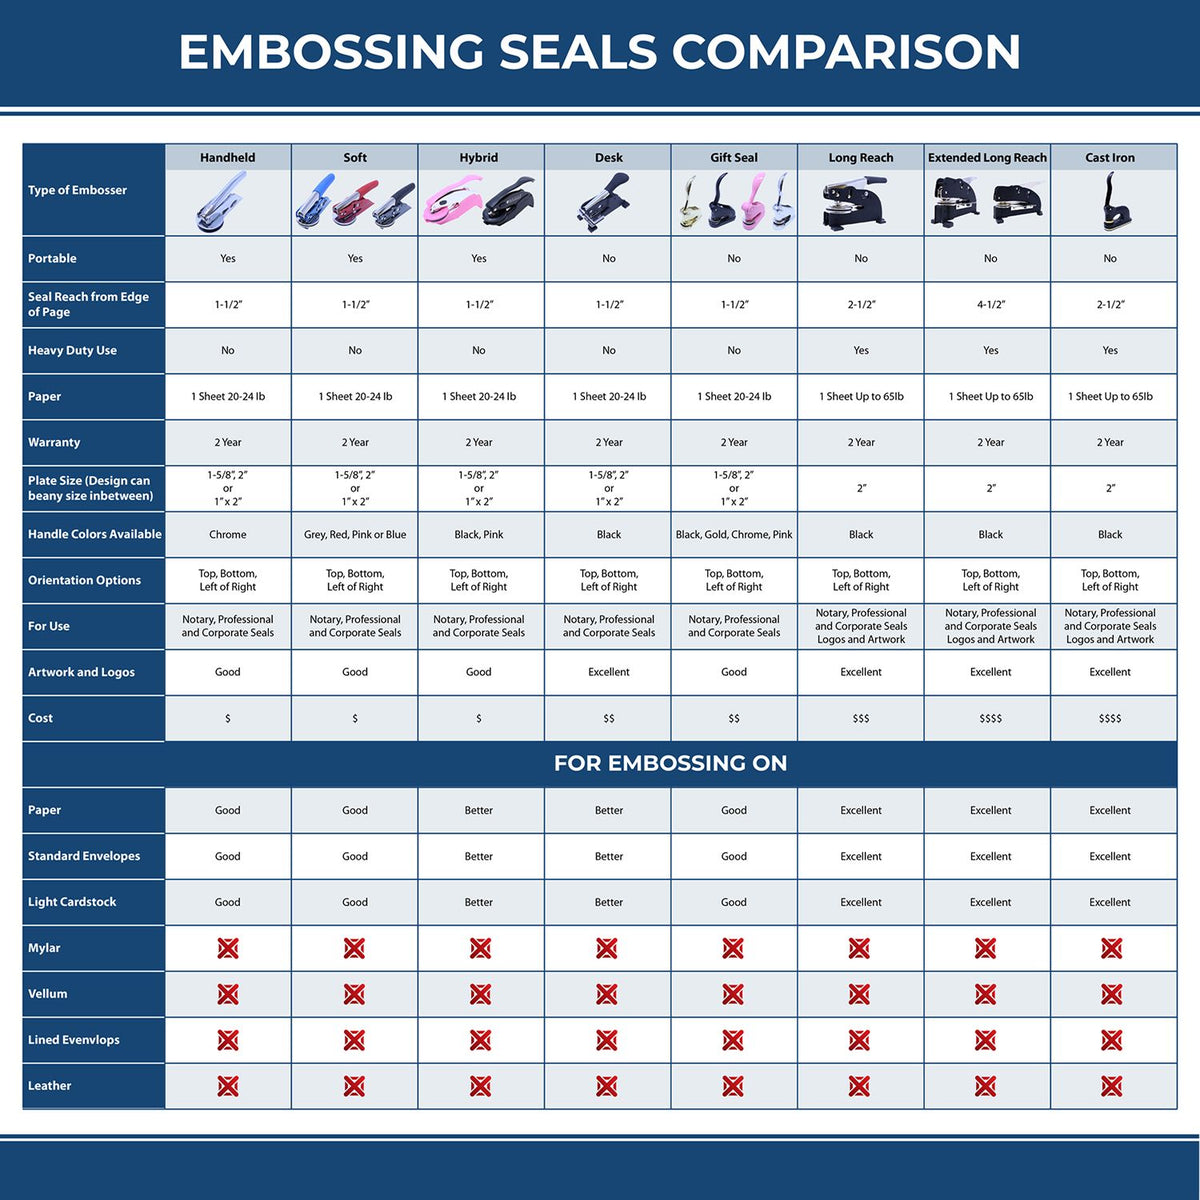 A comparison chart for the different types of mount models available for the State of South Dakota Long Reach Architectural Embossing Seal.